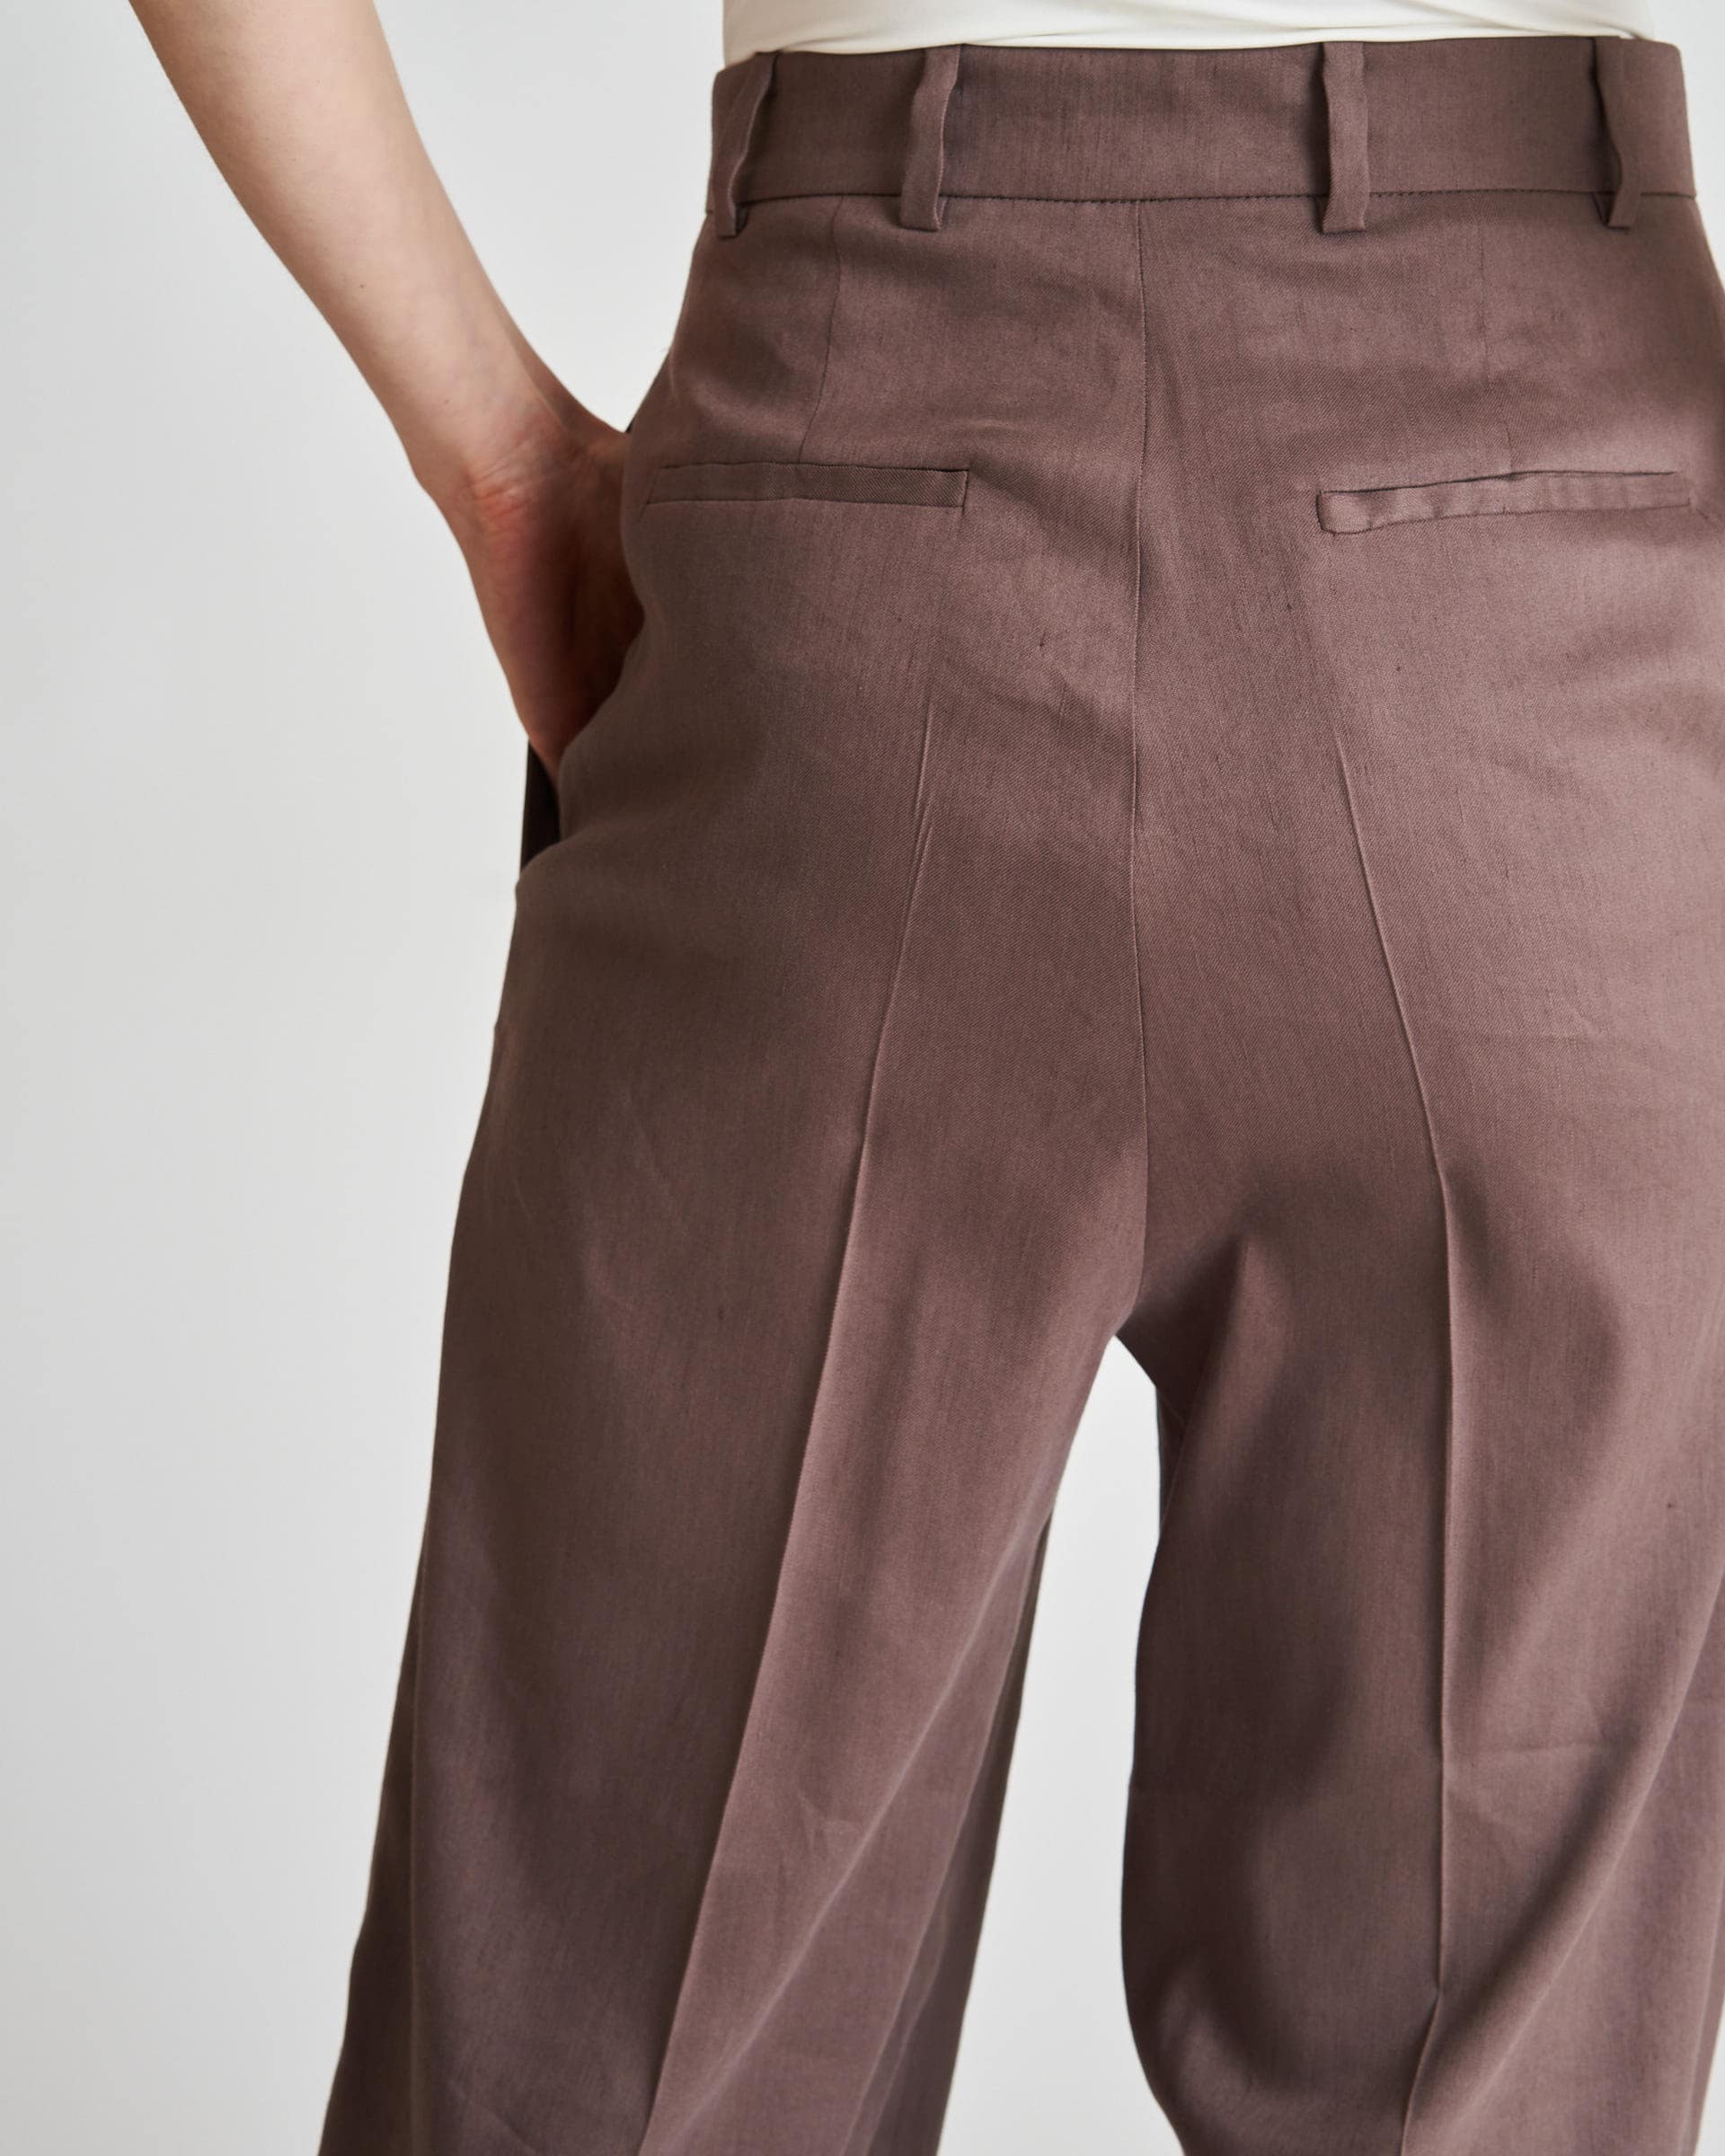 The Market Store | Wide Pants